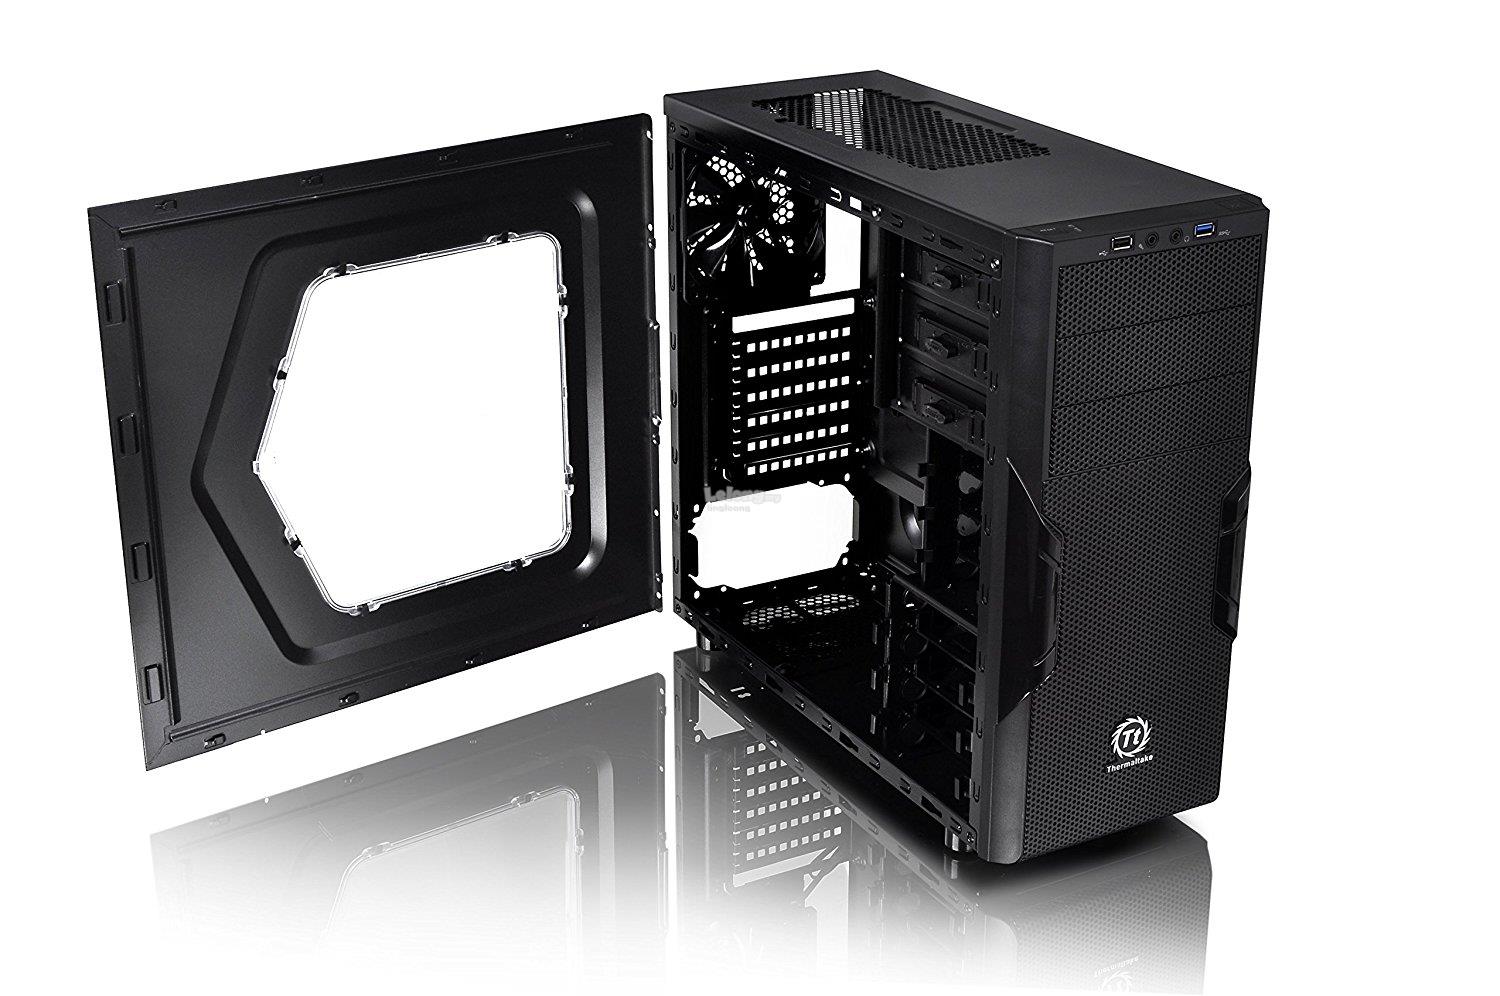 thermaltake-versa-h22-mid-tower-atx-case-lingloong-1805-10-lingloong@7